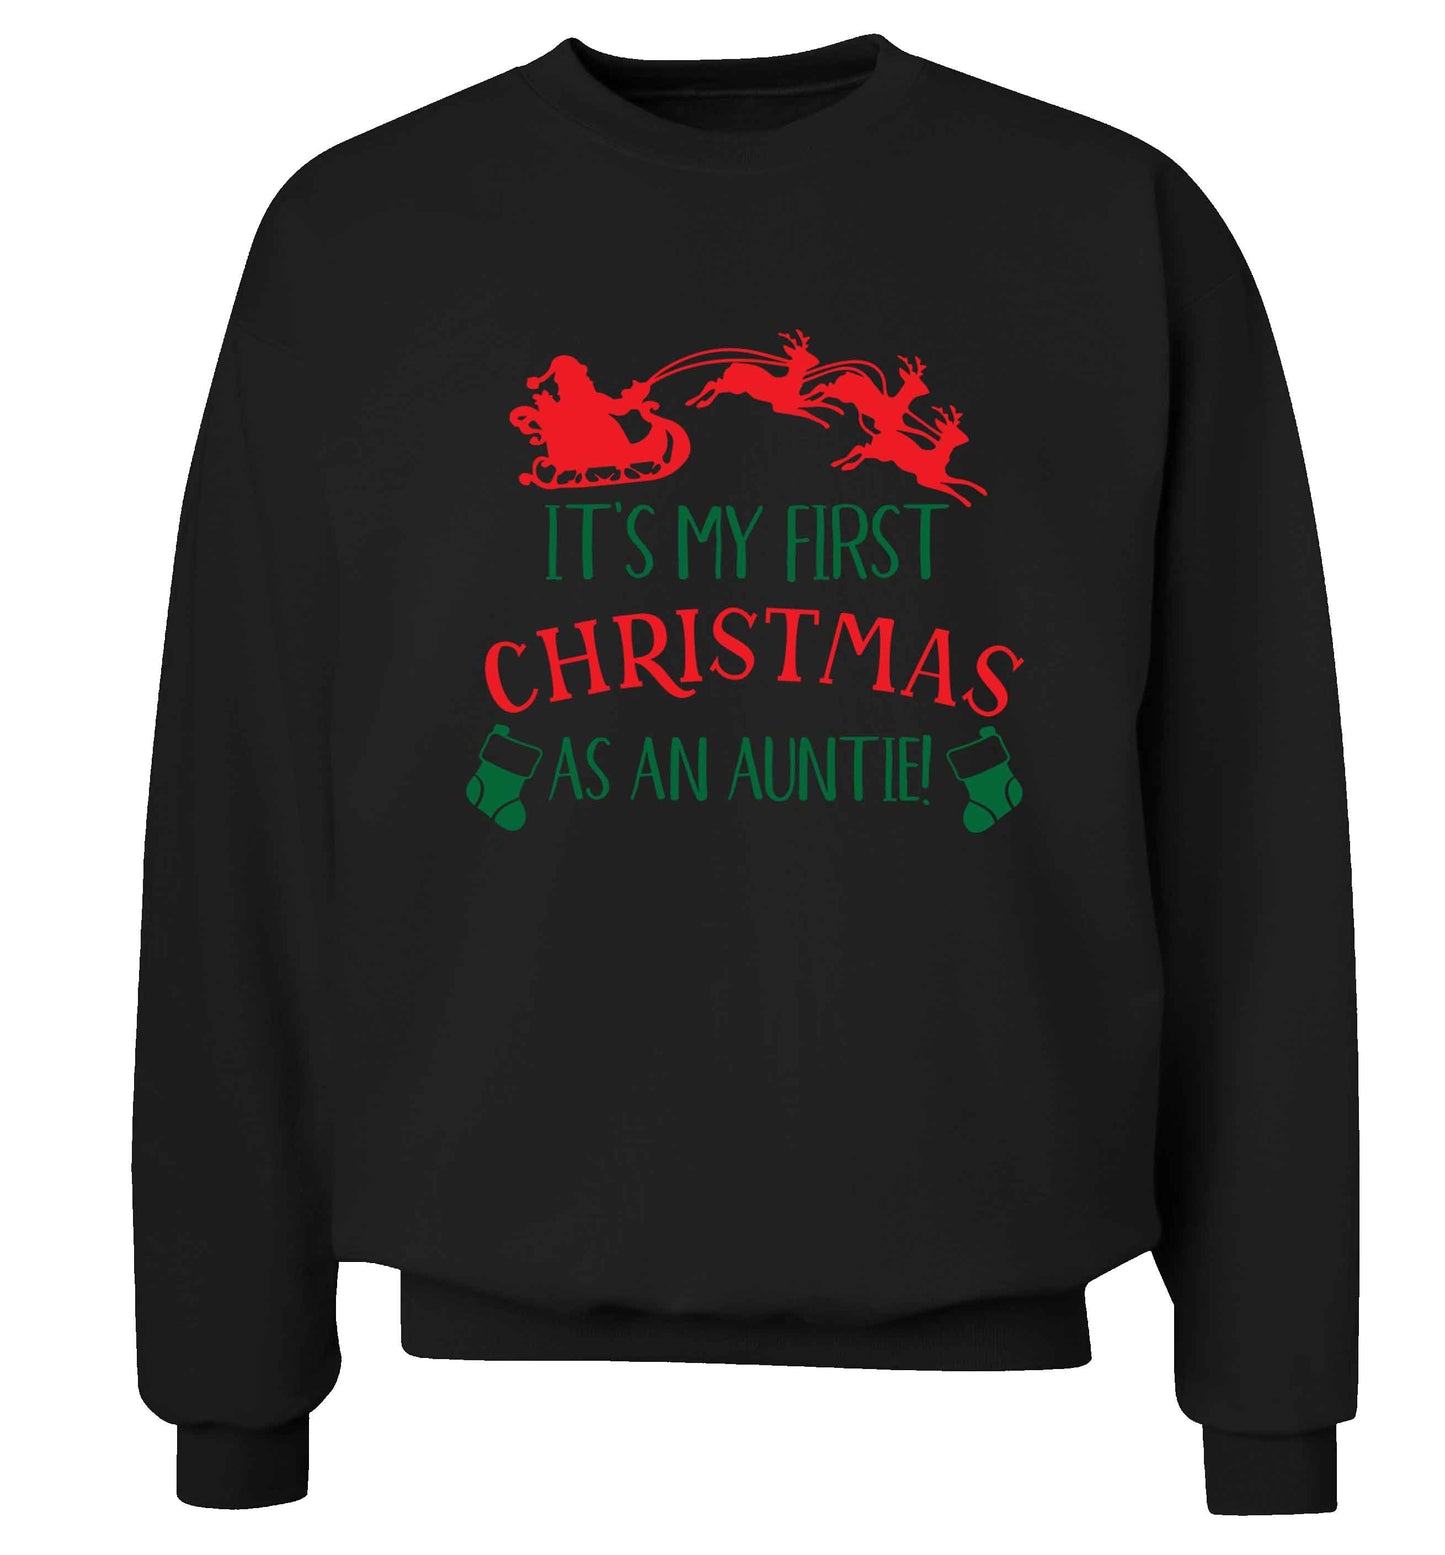 It's my first Christmas as an auntie! Adult's unisex black Sweater 2XL